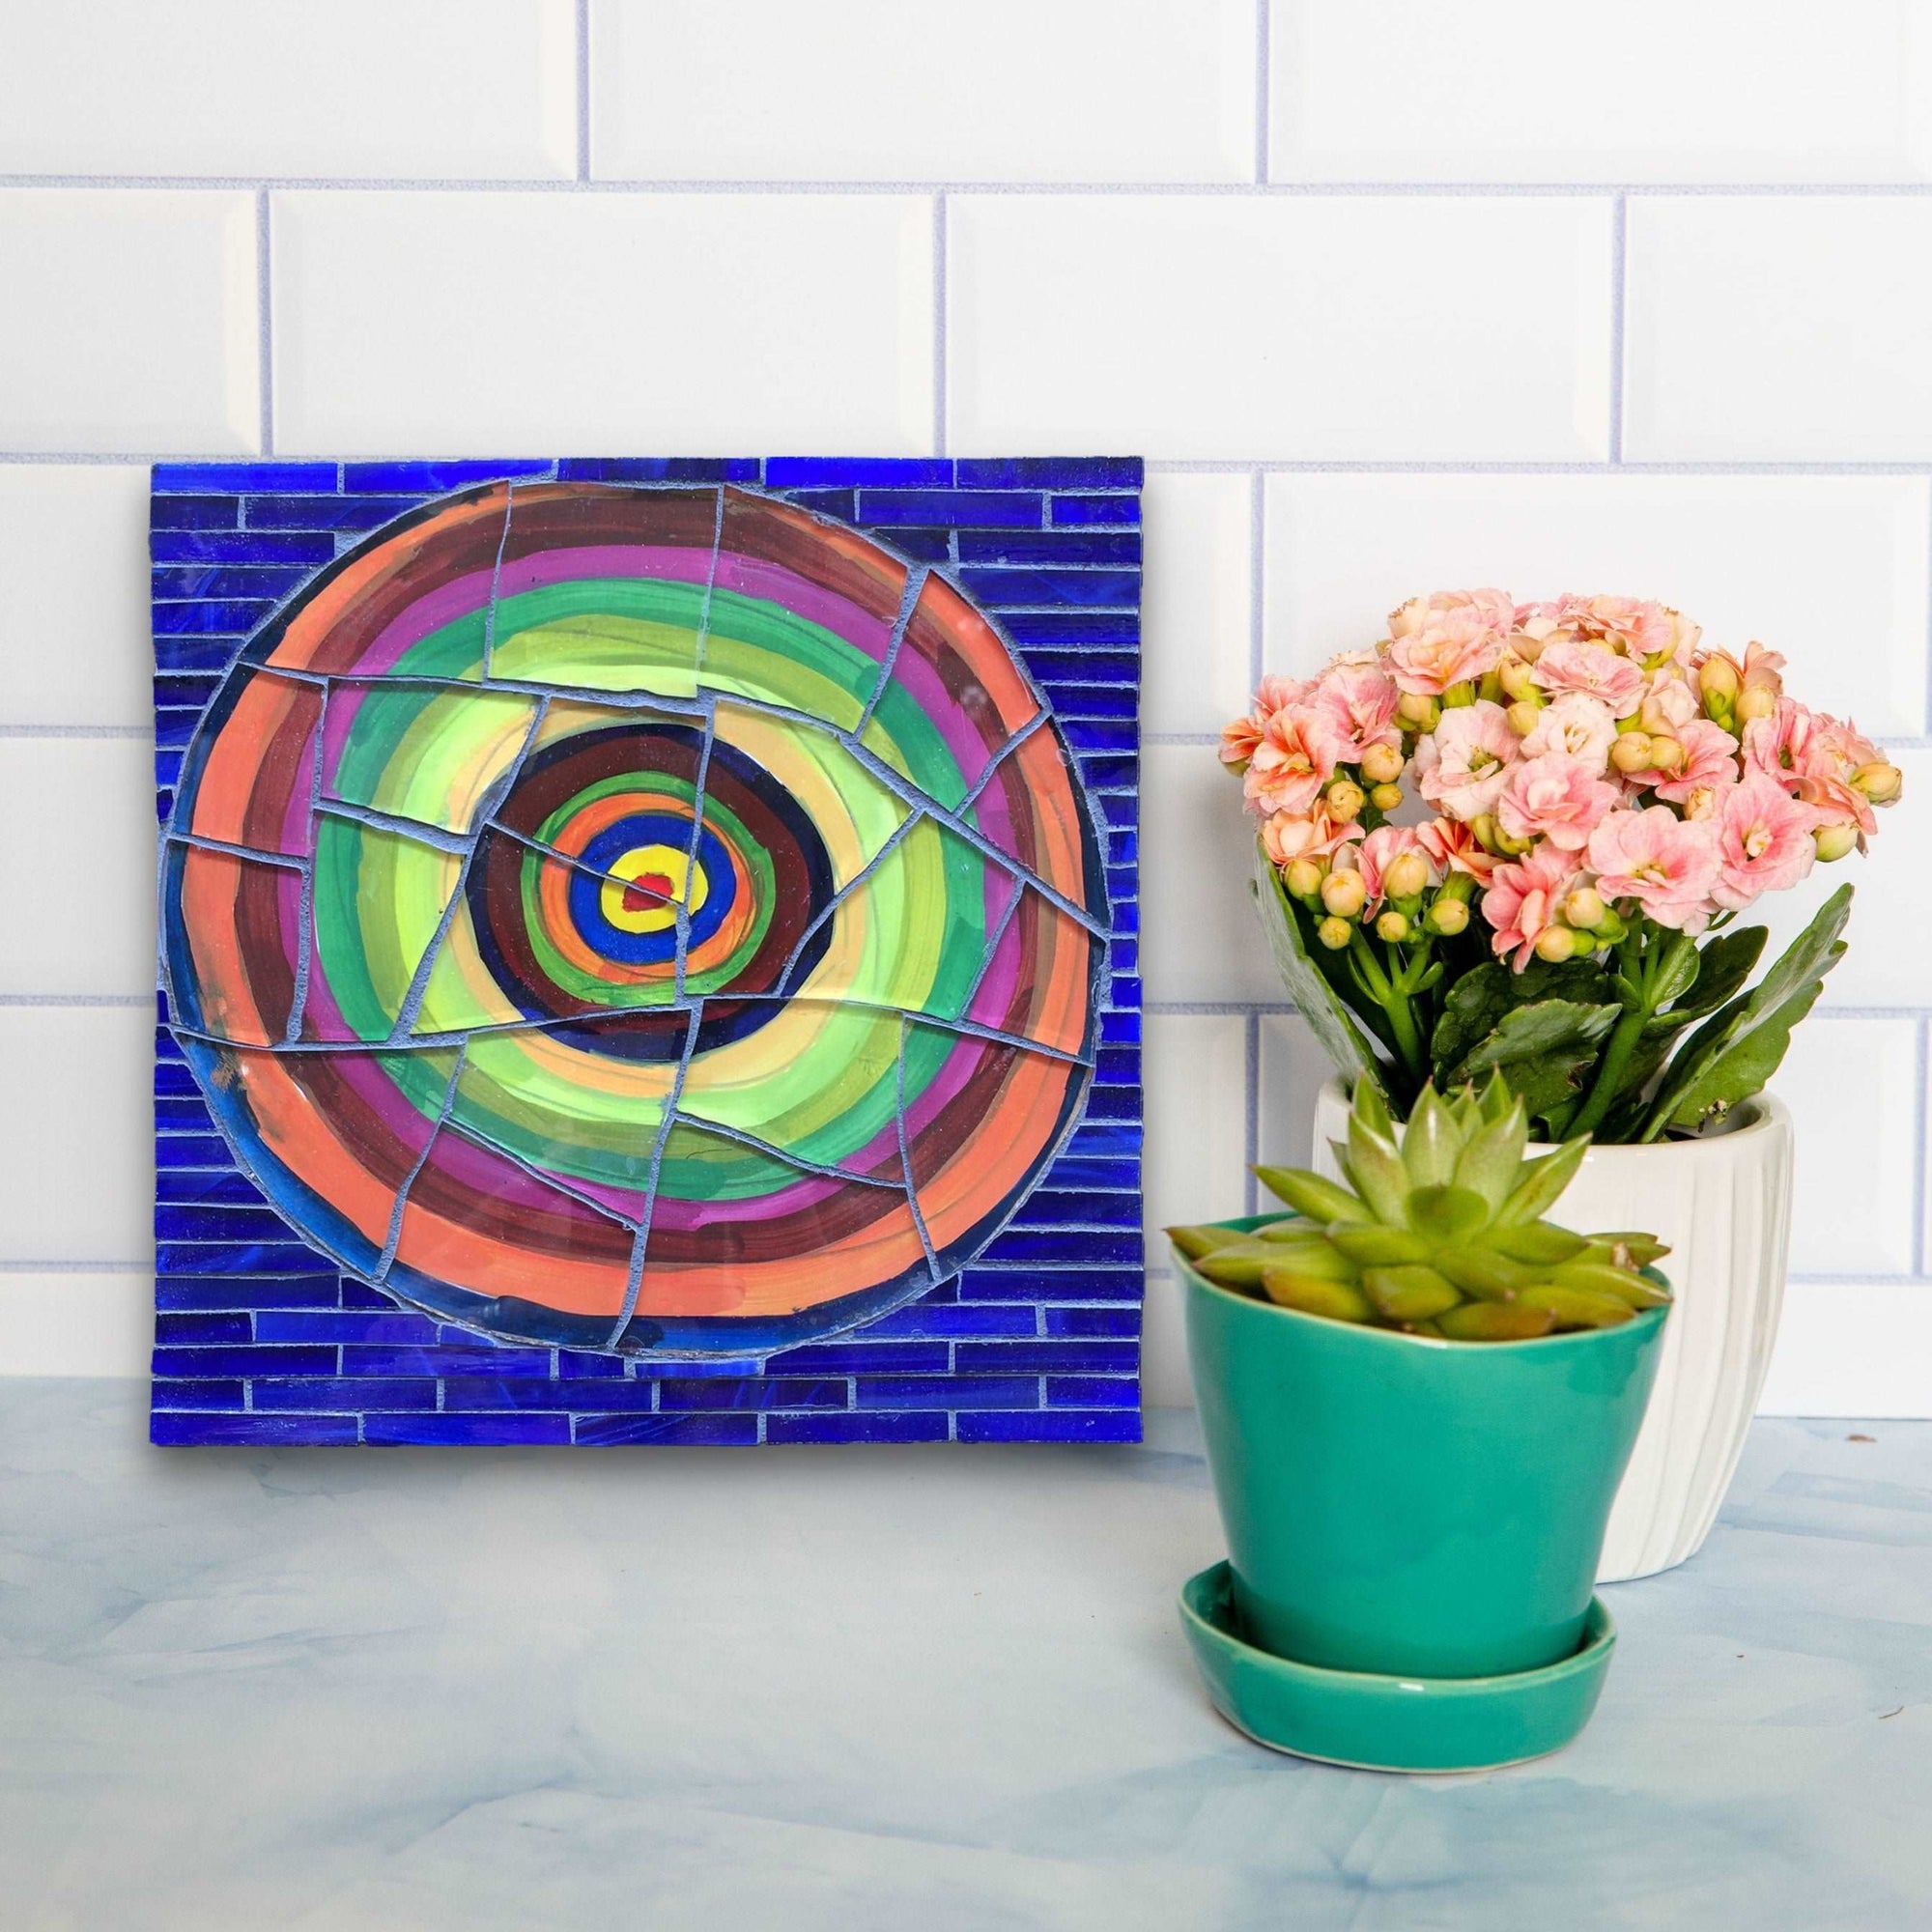 Colorful bullseye design with blue background.